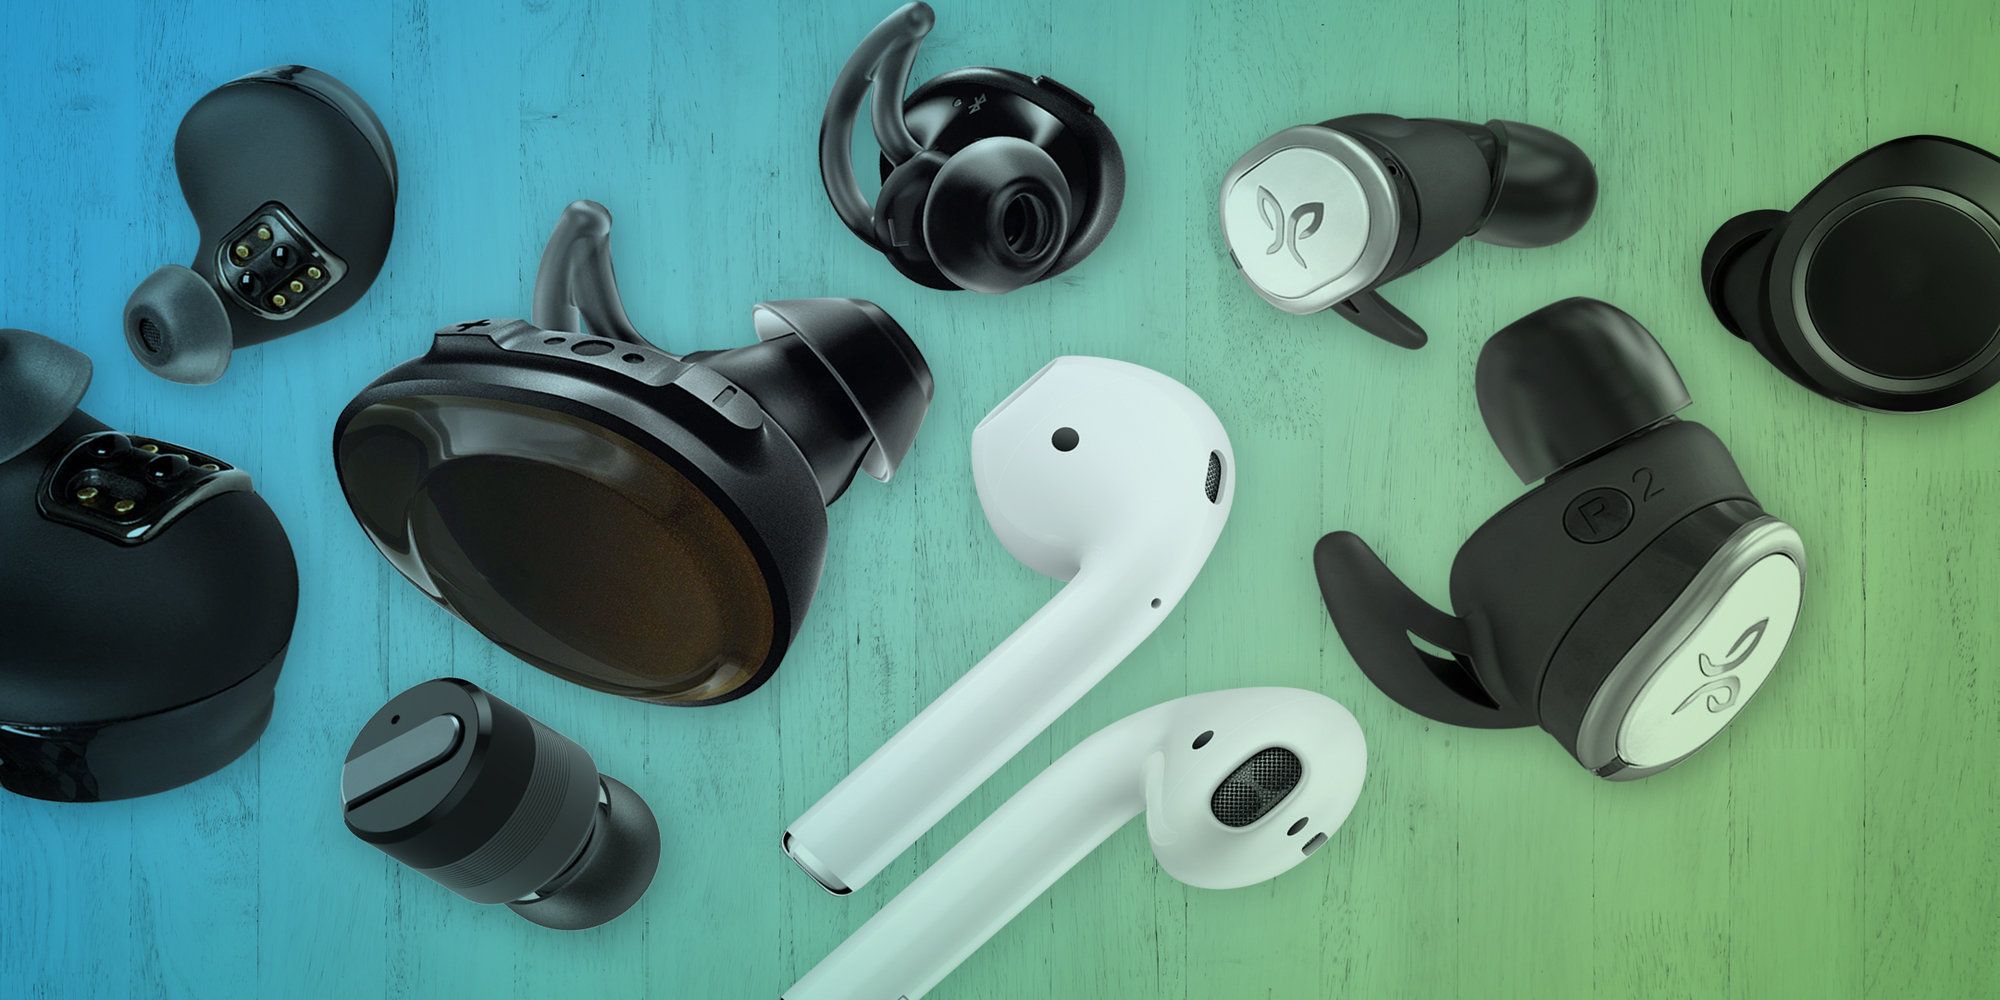 These tips will help you extend the life of your wireless earbuds